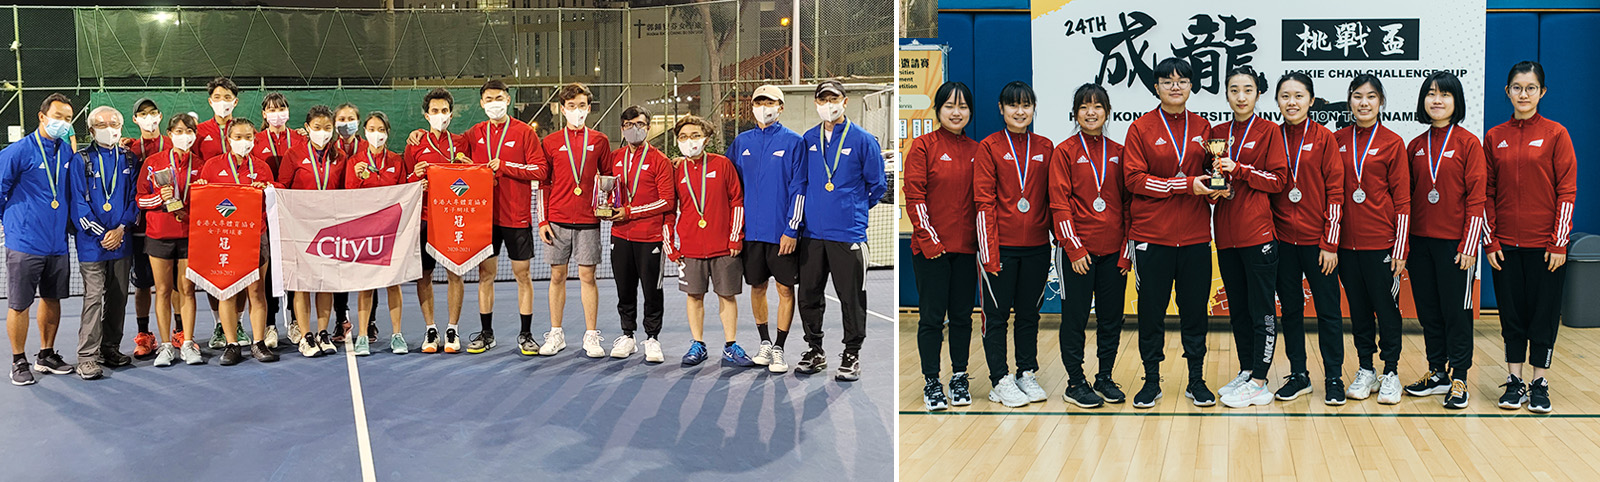 (Left) The CityU men’s team successfully defended its local inter-varsity tennis title this year, while the women’s team won the championship for the first time. (Right) CityU team won the first runner-up at the Jackie Chan Challenge Cup Women’s table tennis competition.